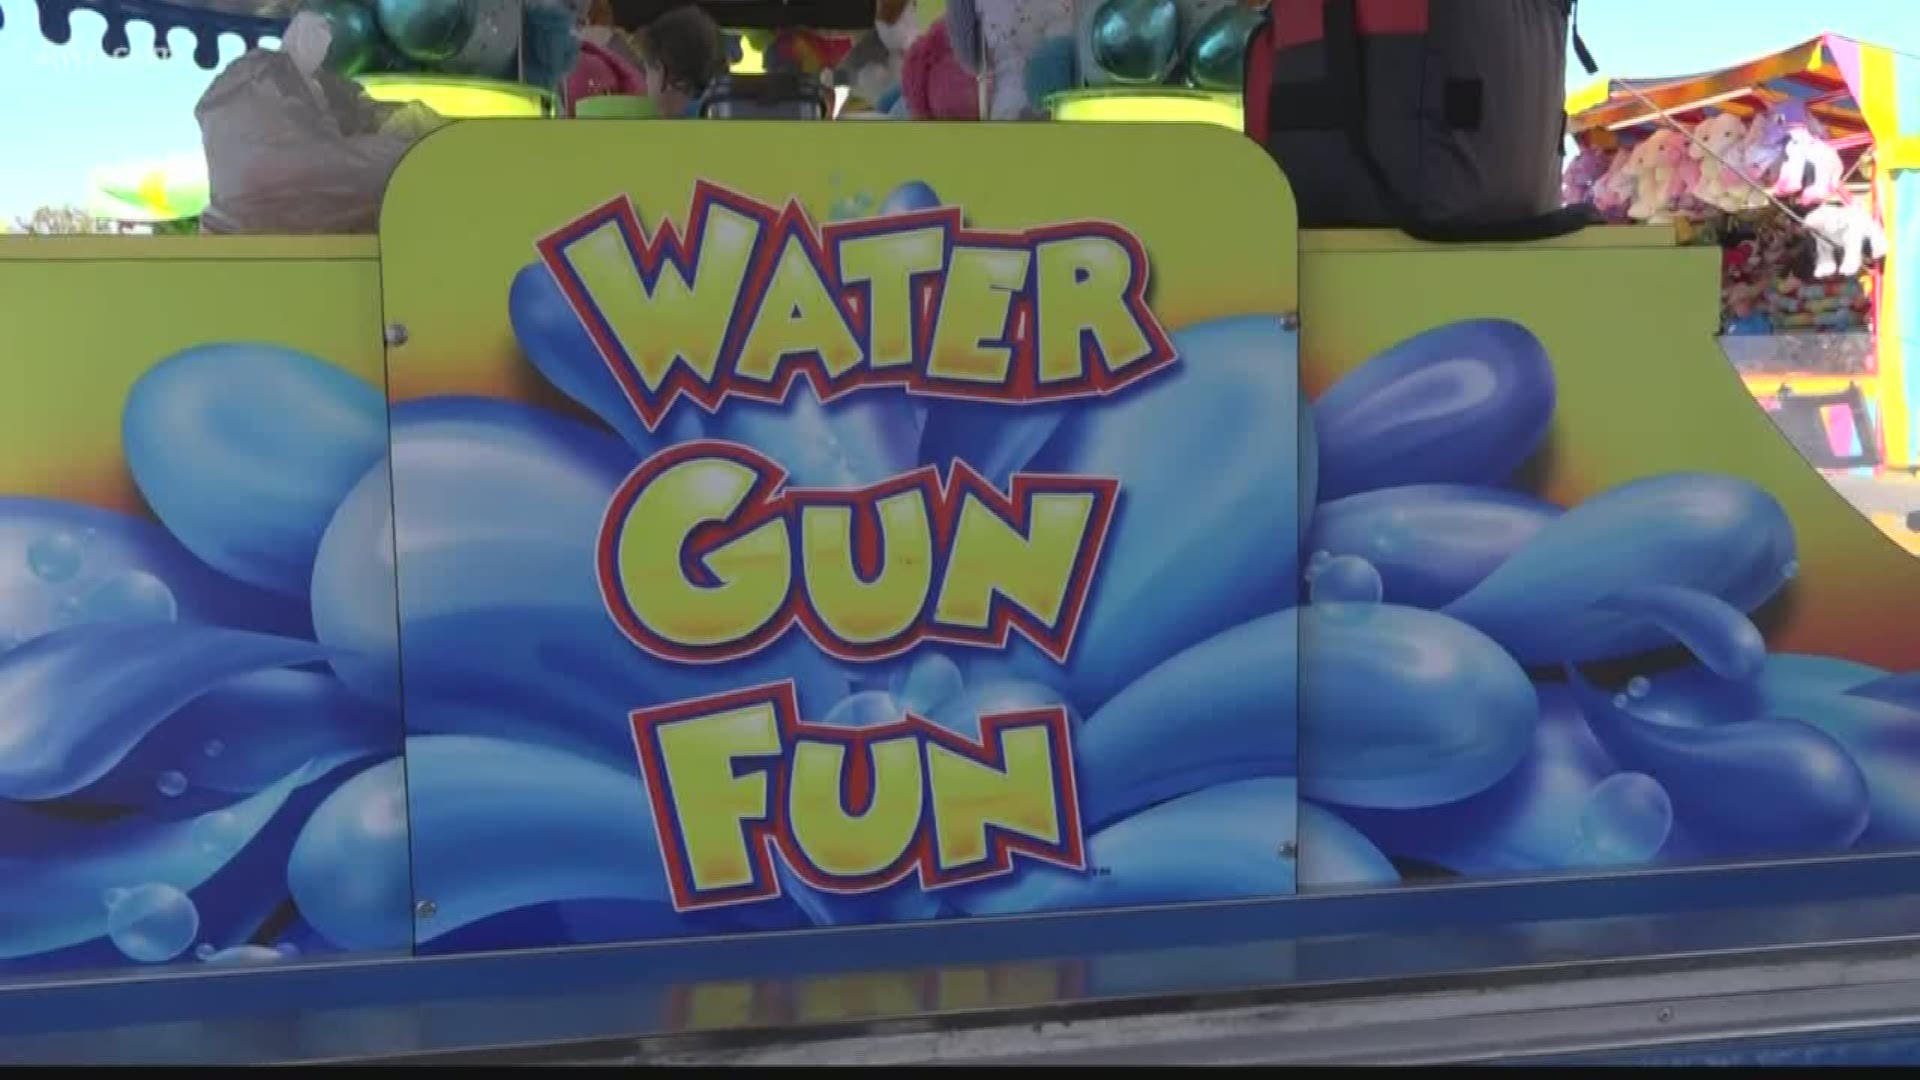 The water gun game was popular with kids at the South Carolina State Fair.